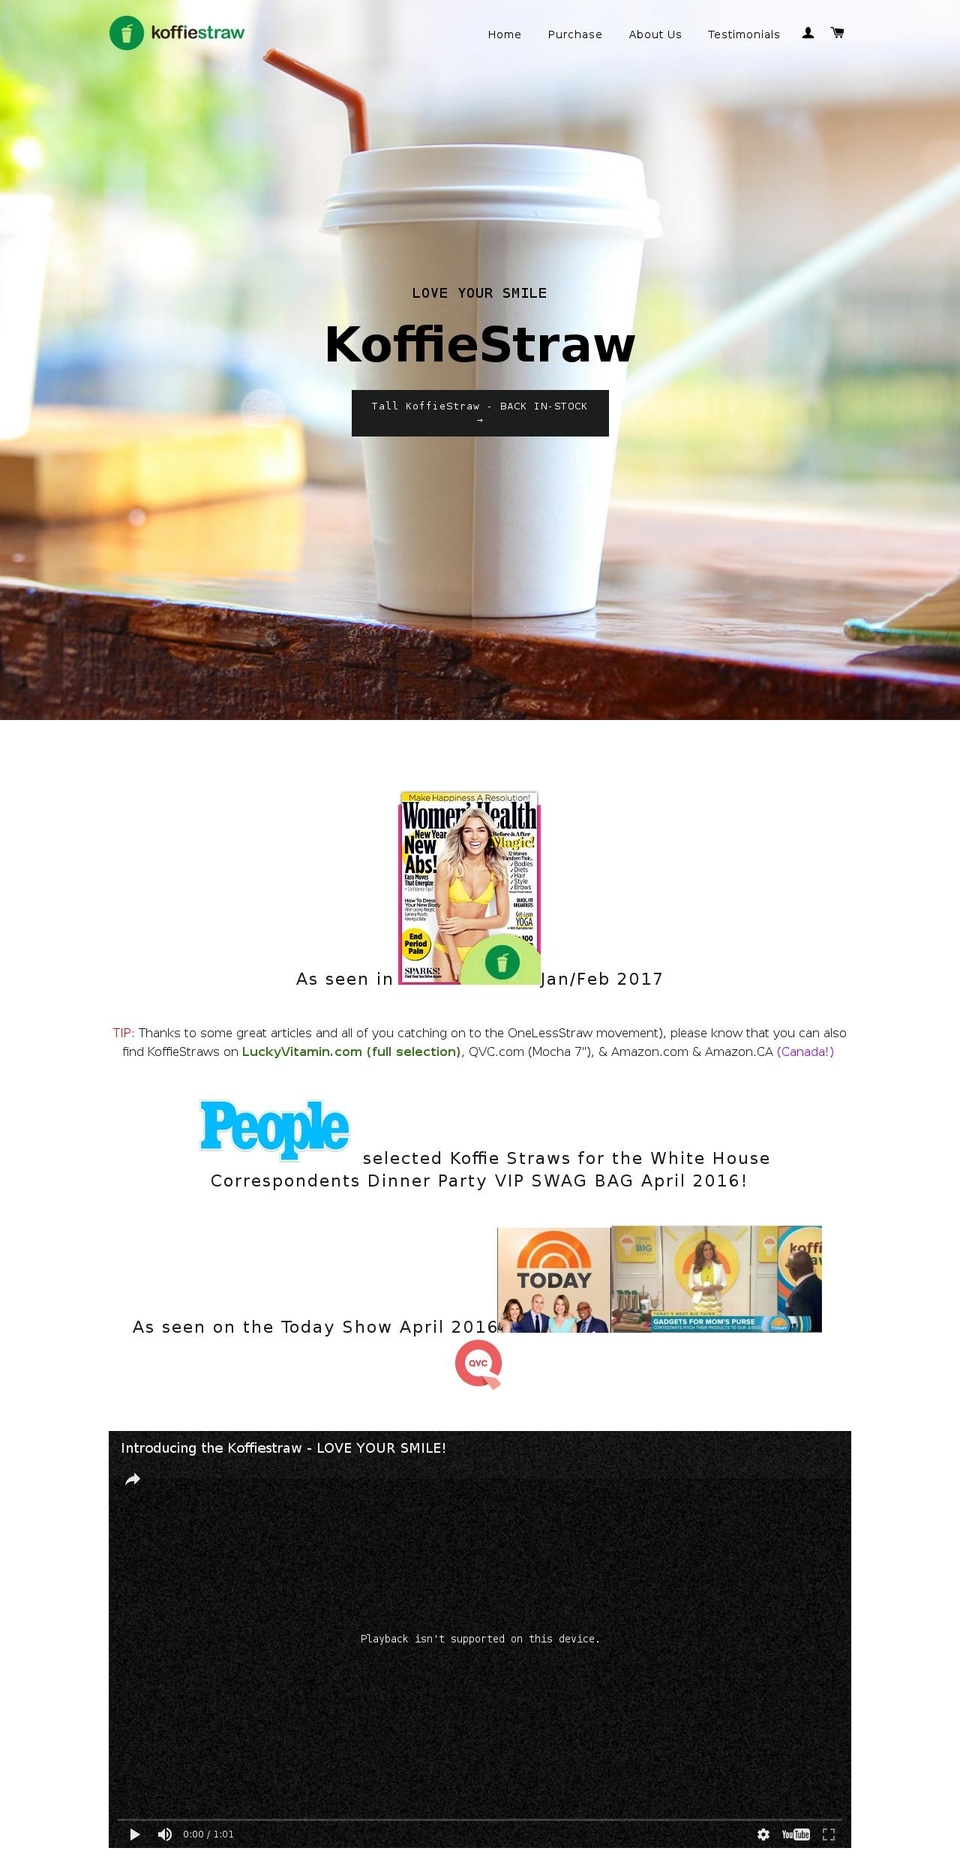 Refresh Shopify theme site example koffiestraw.com